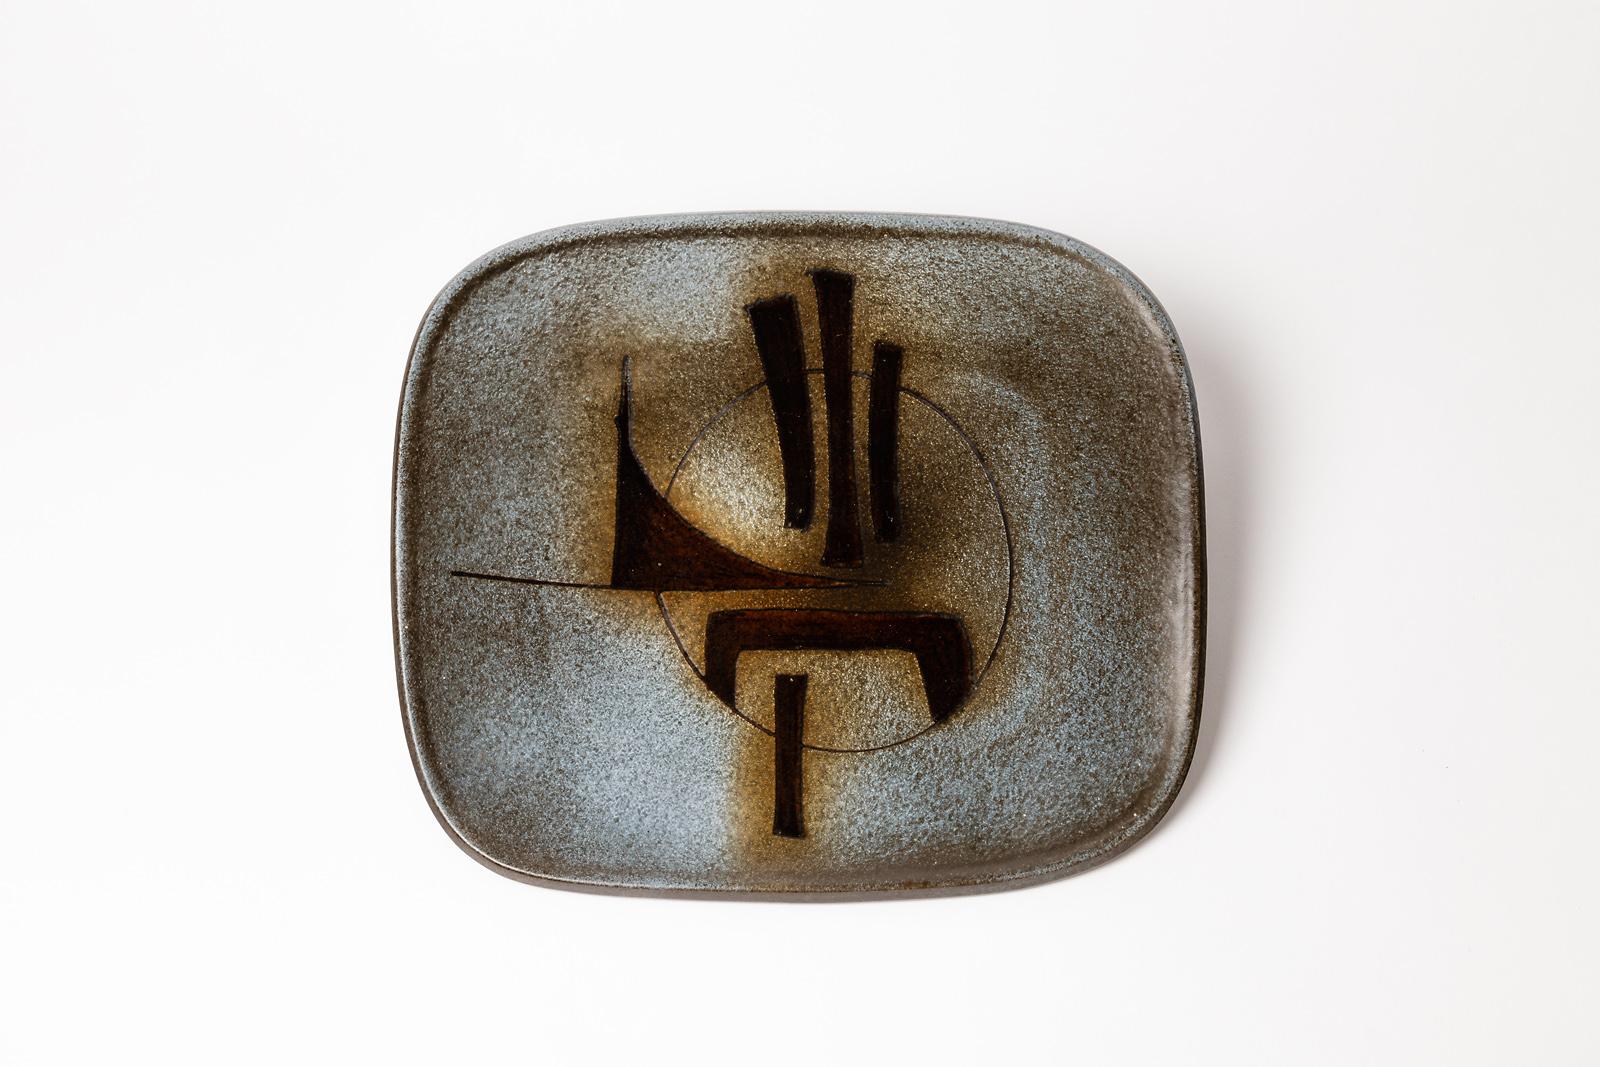 Abbaye du bec, circa 1950

French abstract ceramic plate.

Decorative wall ceramic plate with black and brown abstract decoration.

Perfect original conditions

Signed under the base

Measures: Height 3cm, large 30cm, depth 26cm.